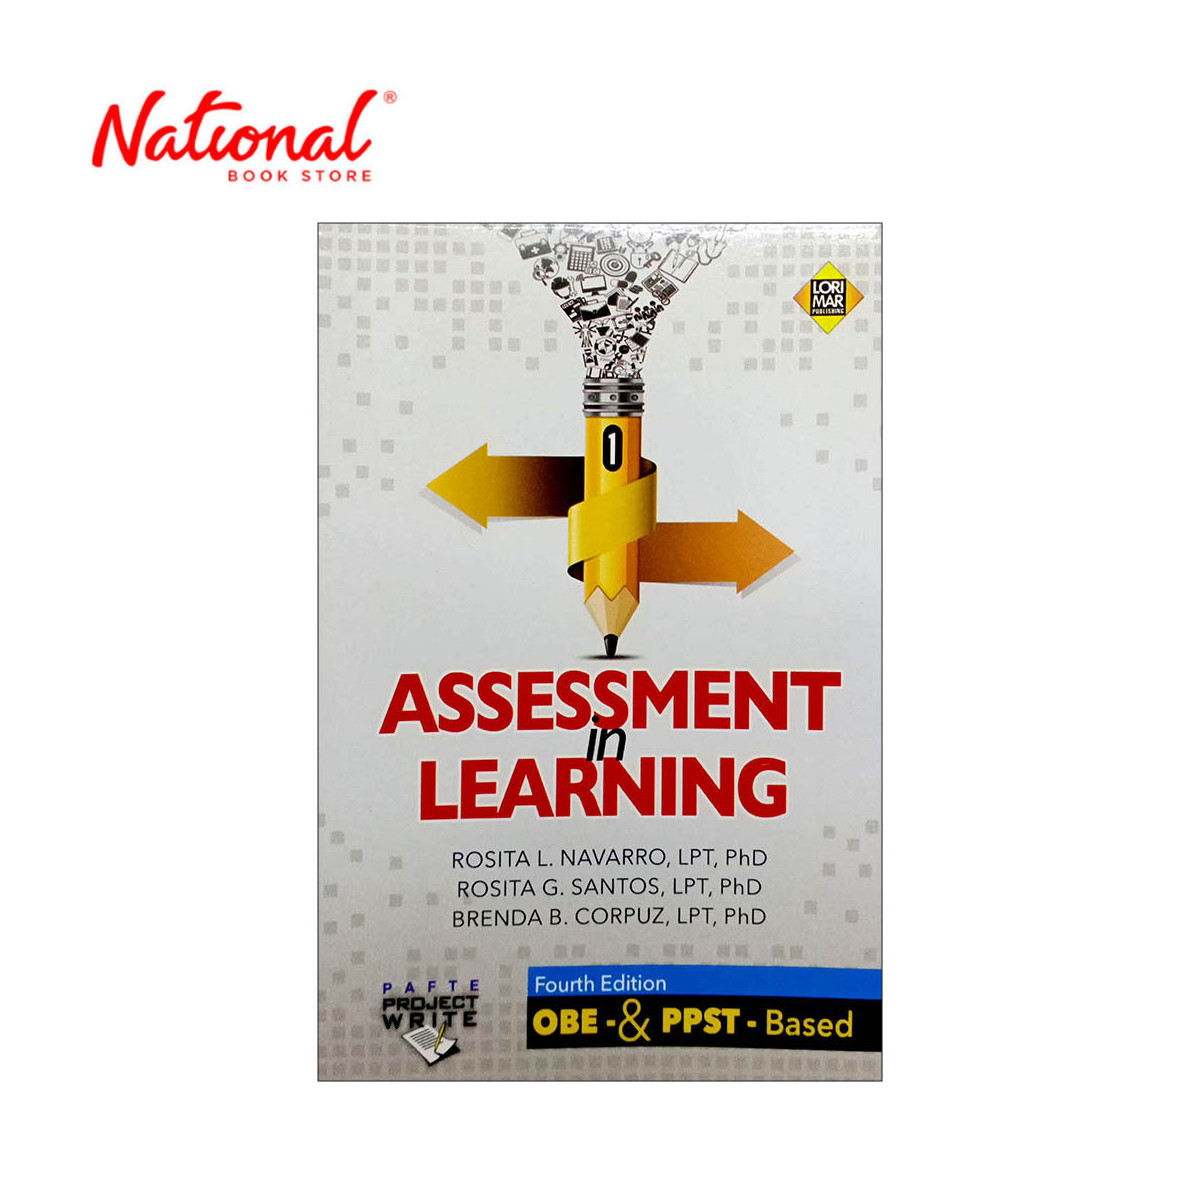 Assessment in Learning, 4th Edition by Rosita L. Navarro, et al. - Trade Paperback - Education